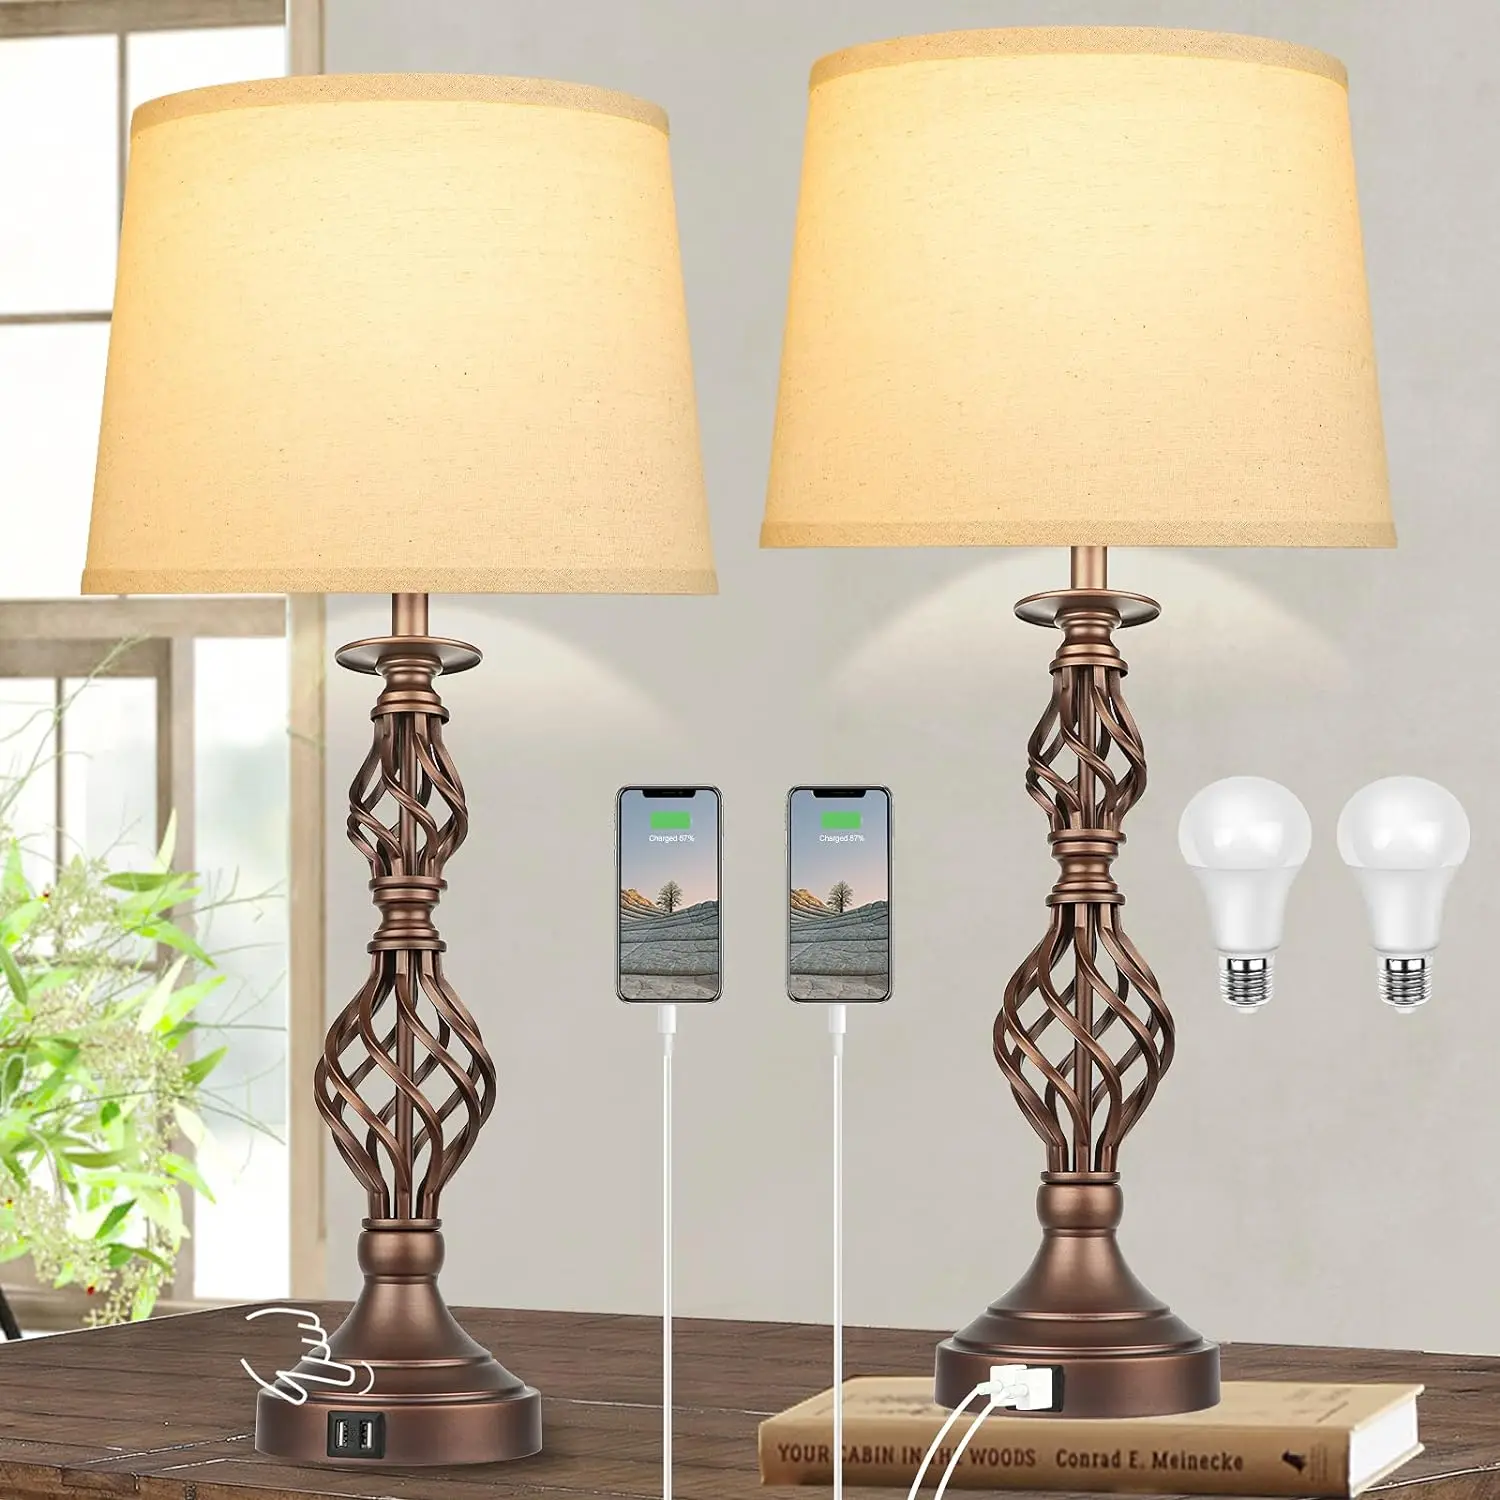 

Lamps Vintage Bedside Lamps with Dual USB Charging Ports Set of 2, Farmhouse Nightstand Lamps Retro with Dual Spiral Cage Desig